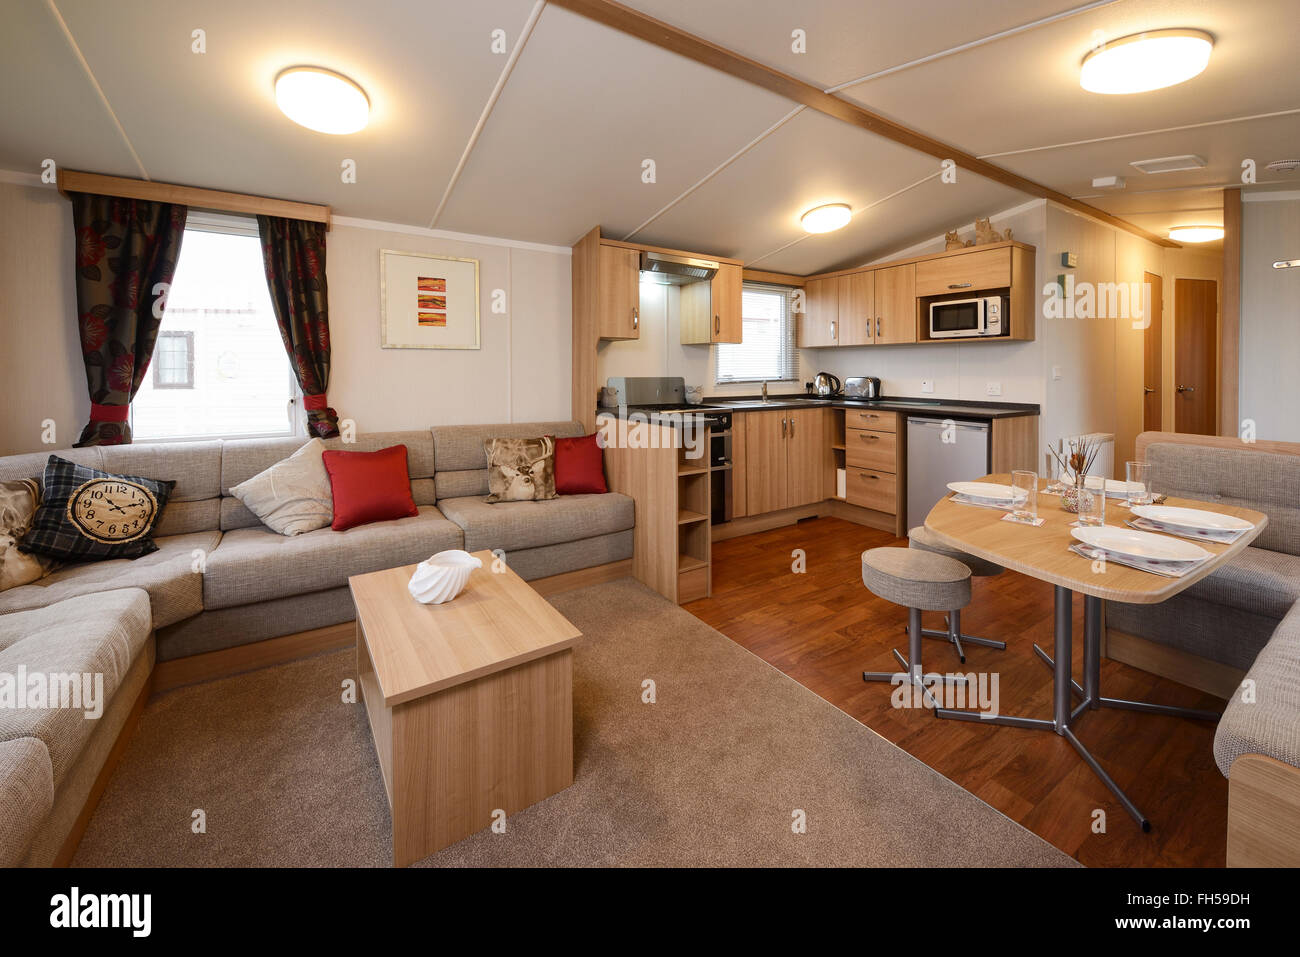 Interior Of A Static Caravan Showing Living Room Kitchen And